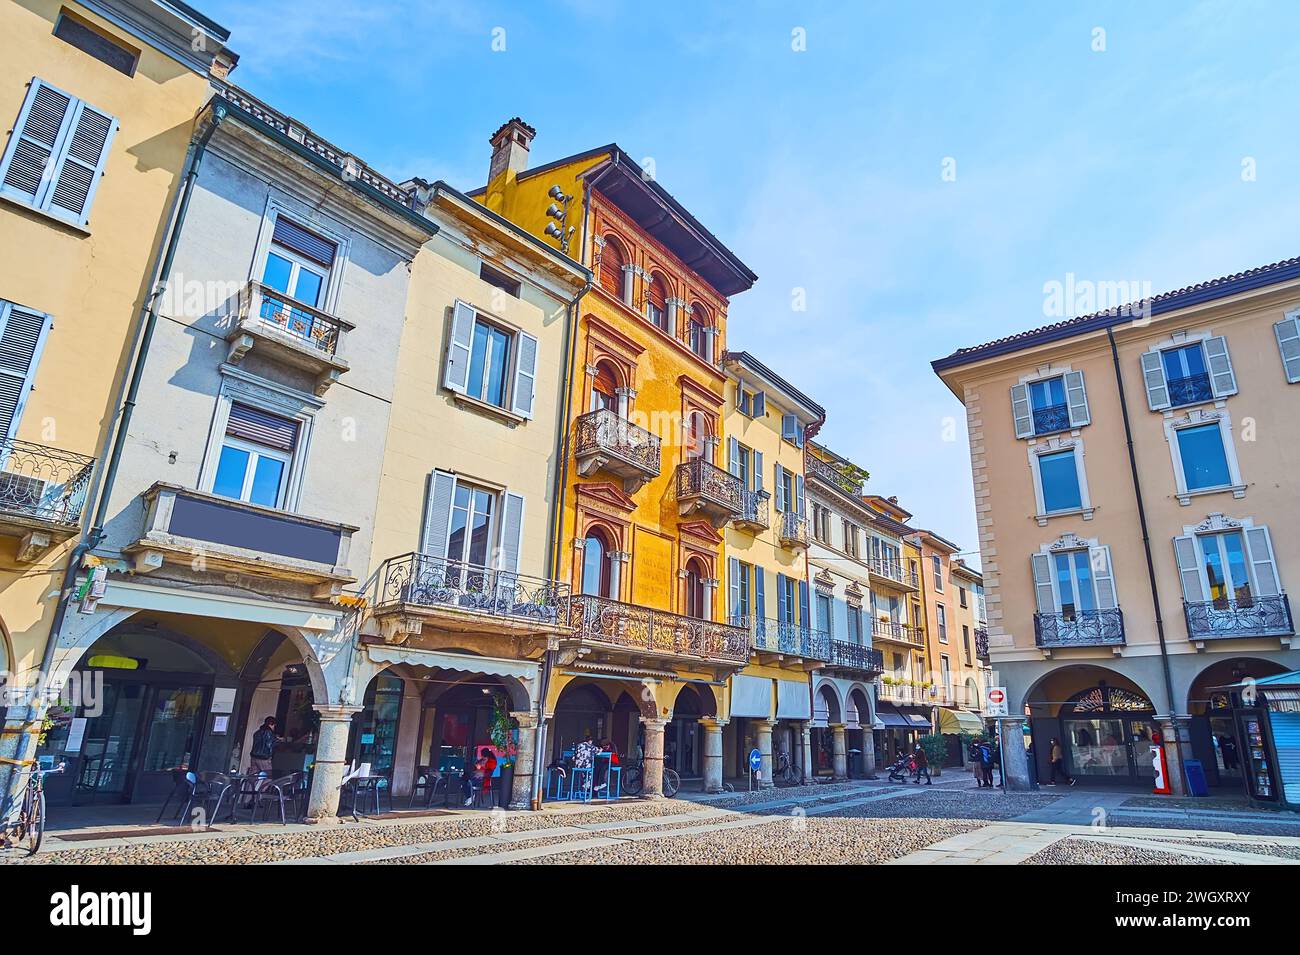 Piazza della Vittoria with historic houses, restaurants and small shops, Lodi, Lombardy, Italy Stock Photo